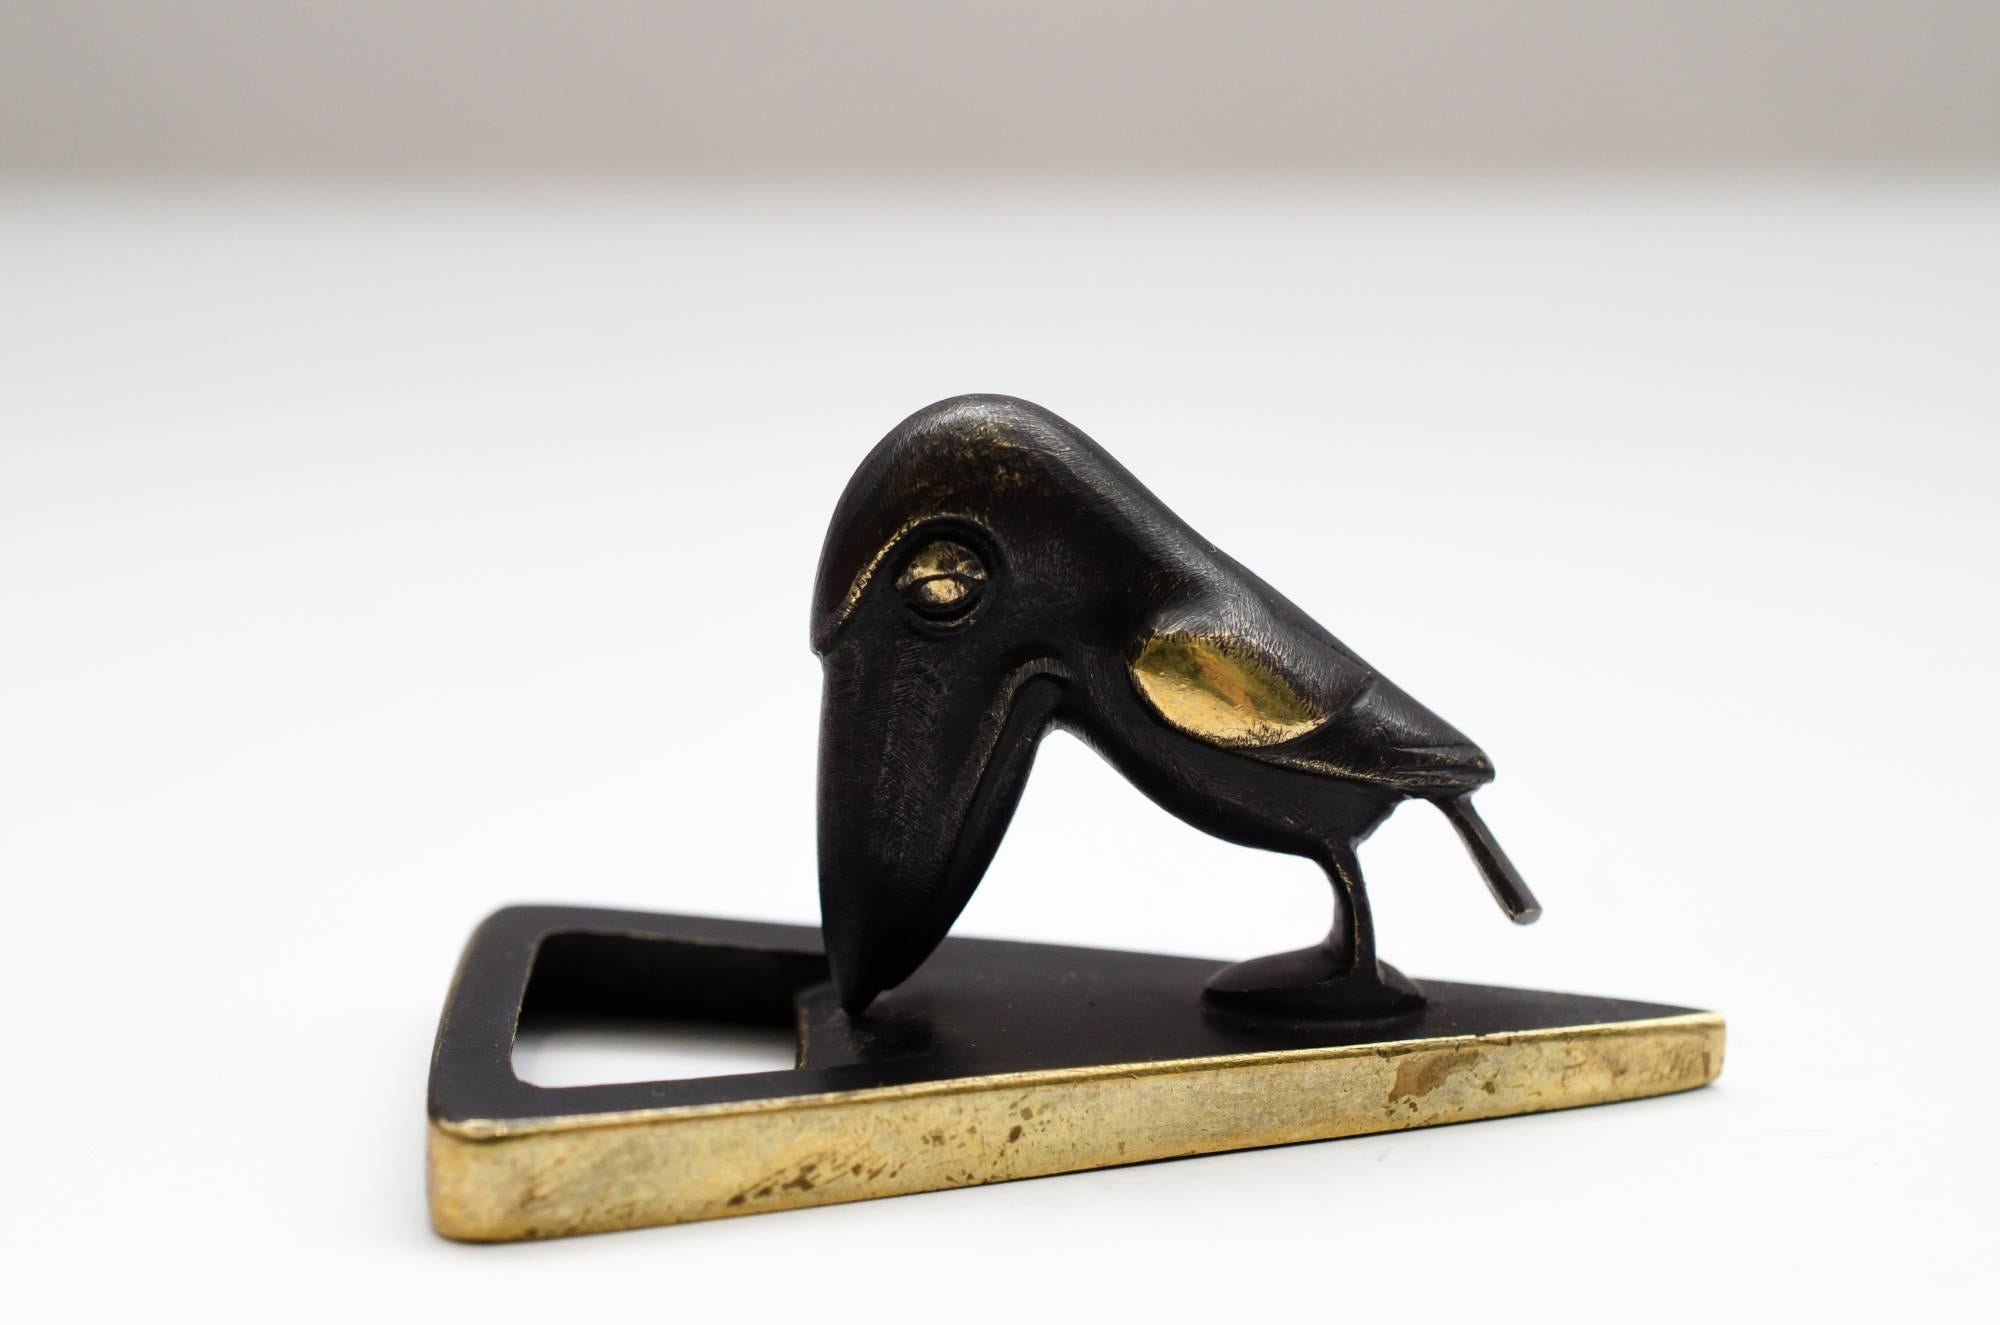 Bottle opener showing a raven by Richard Rohac
Original condition.